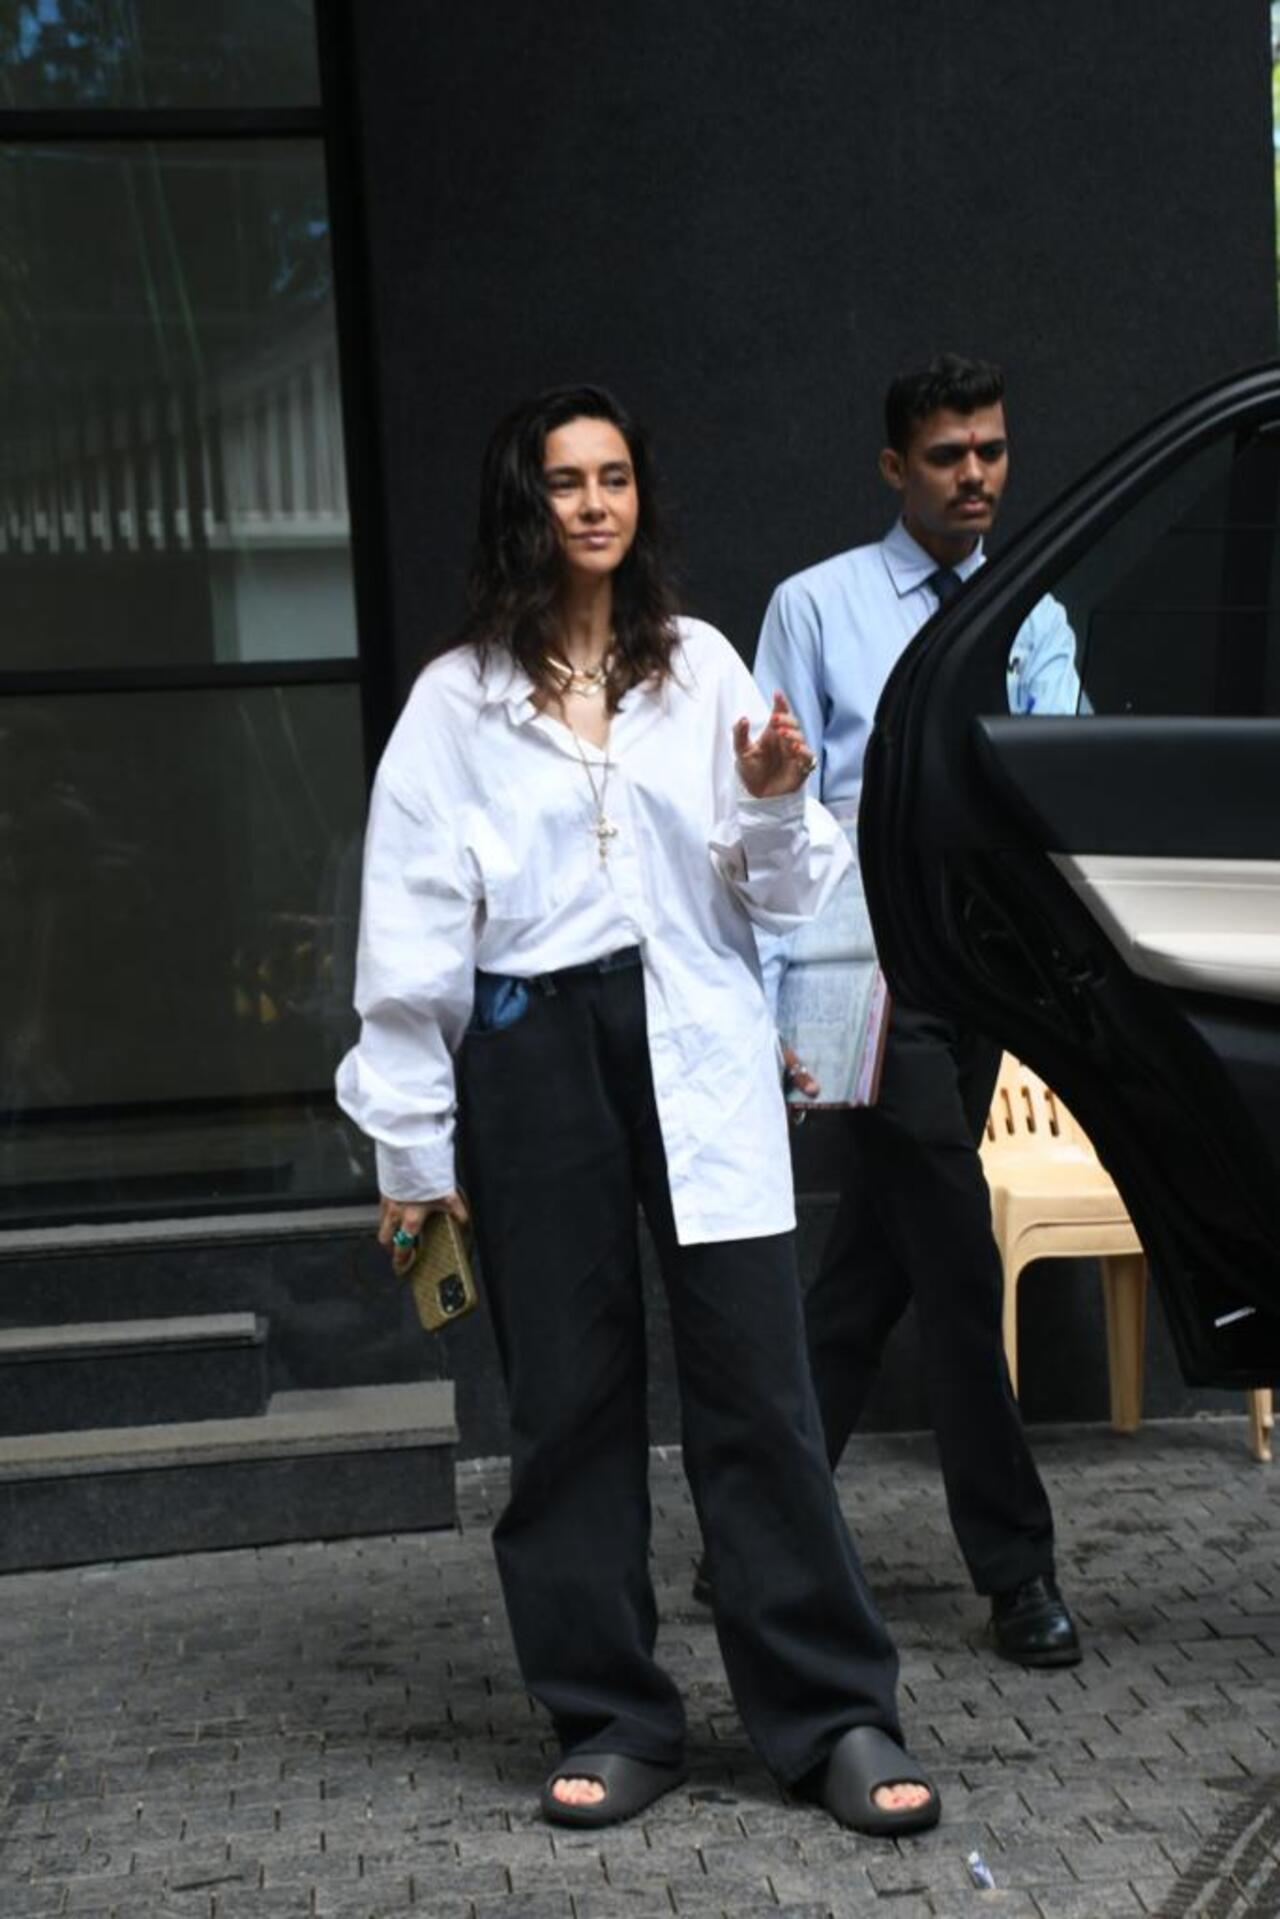 Shibani Dandekar posed for the paparazzi as she stepped out in the city